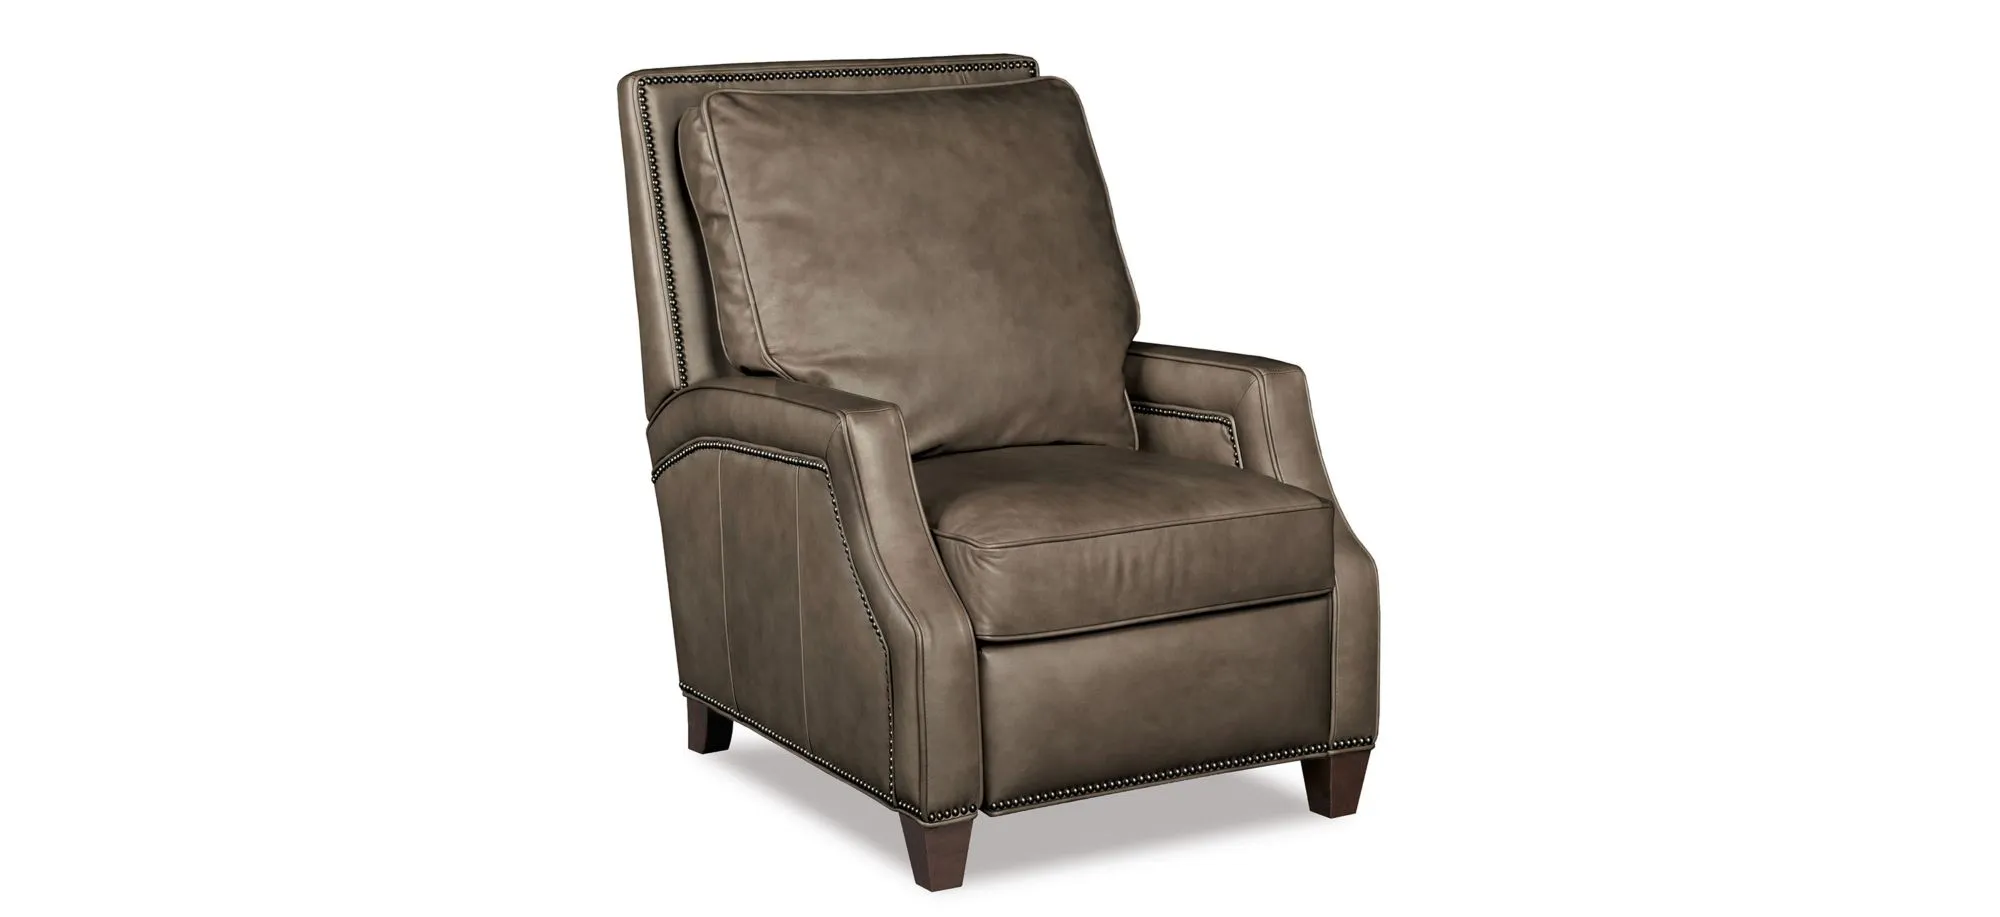 Caleigh Recliner in Grey by Hooker Furniture